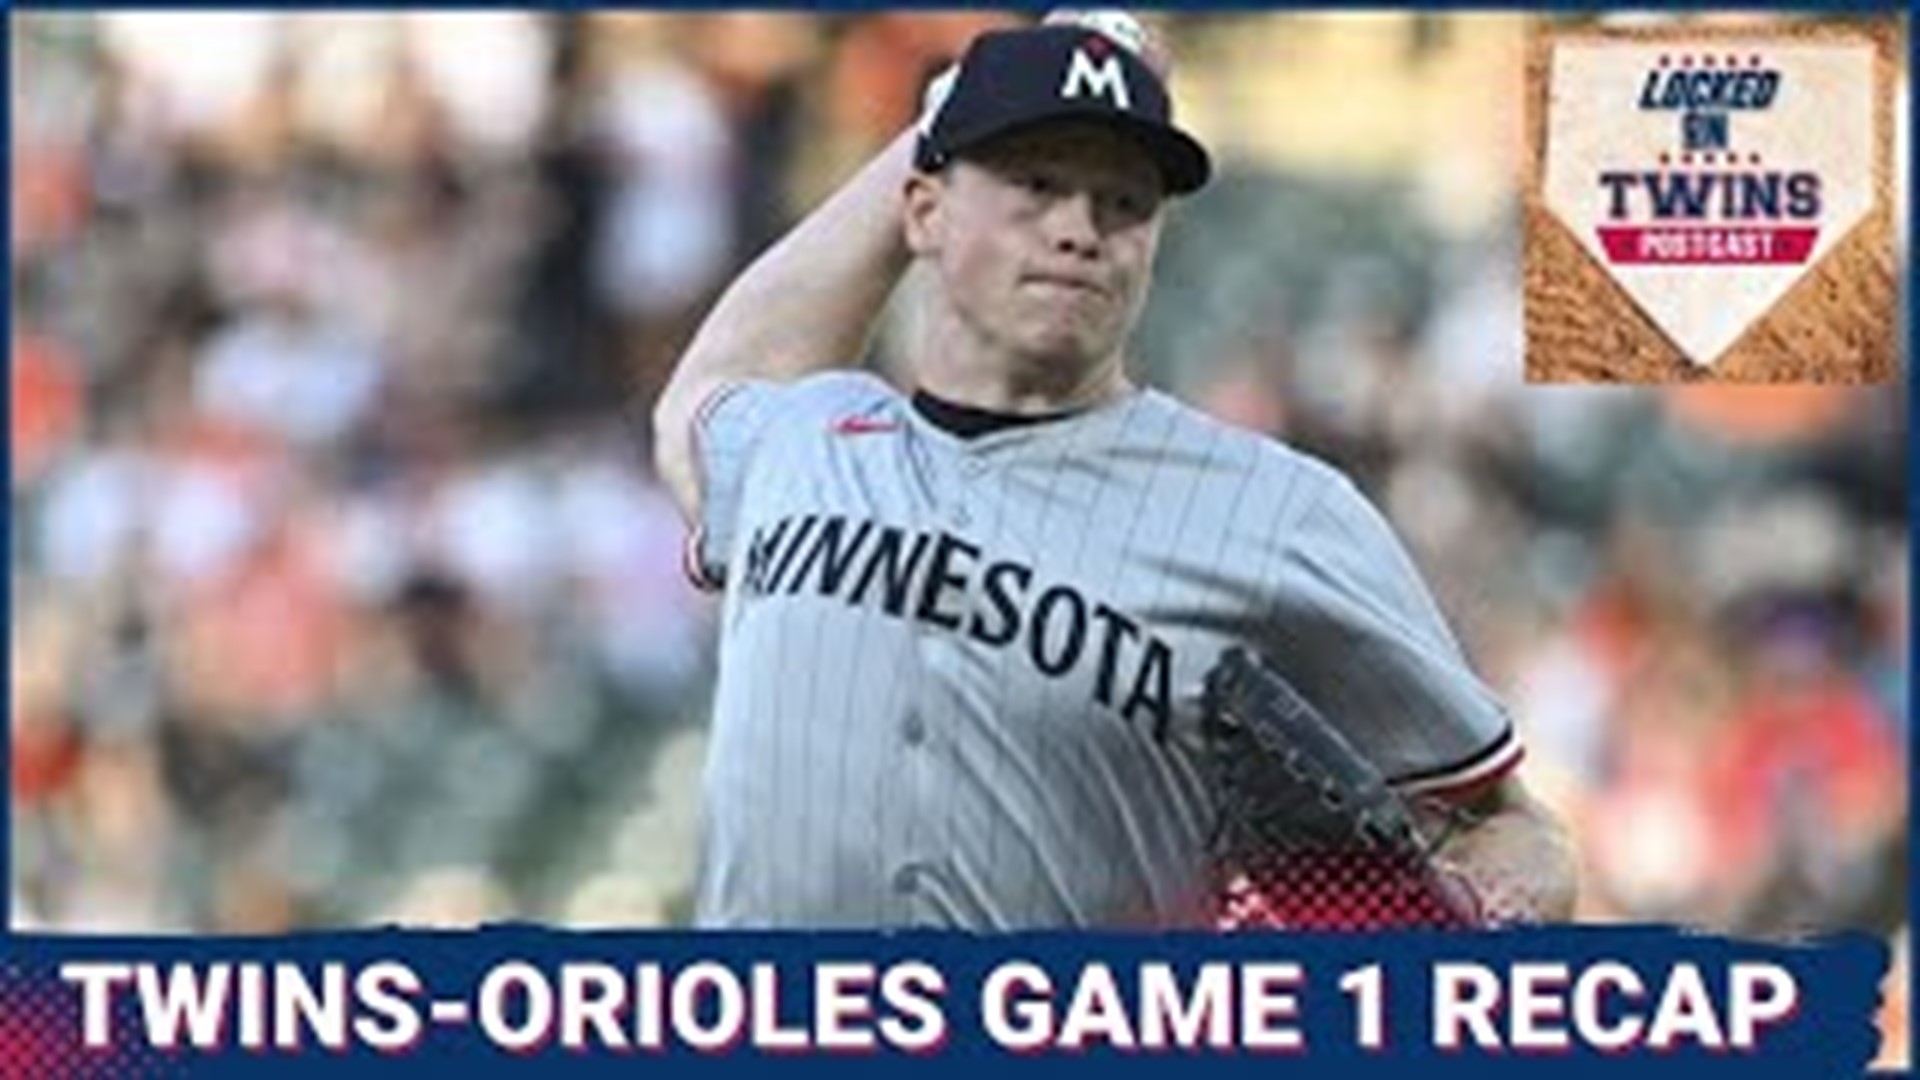 The Minnesota Twins travel to Baltimore to take on one of the hottest teams in the MLB. Louie Varland on the mound for the Twins. Join us following the game!